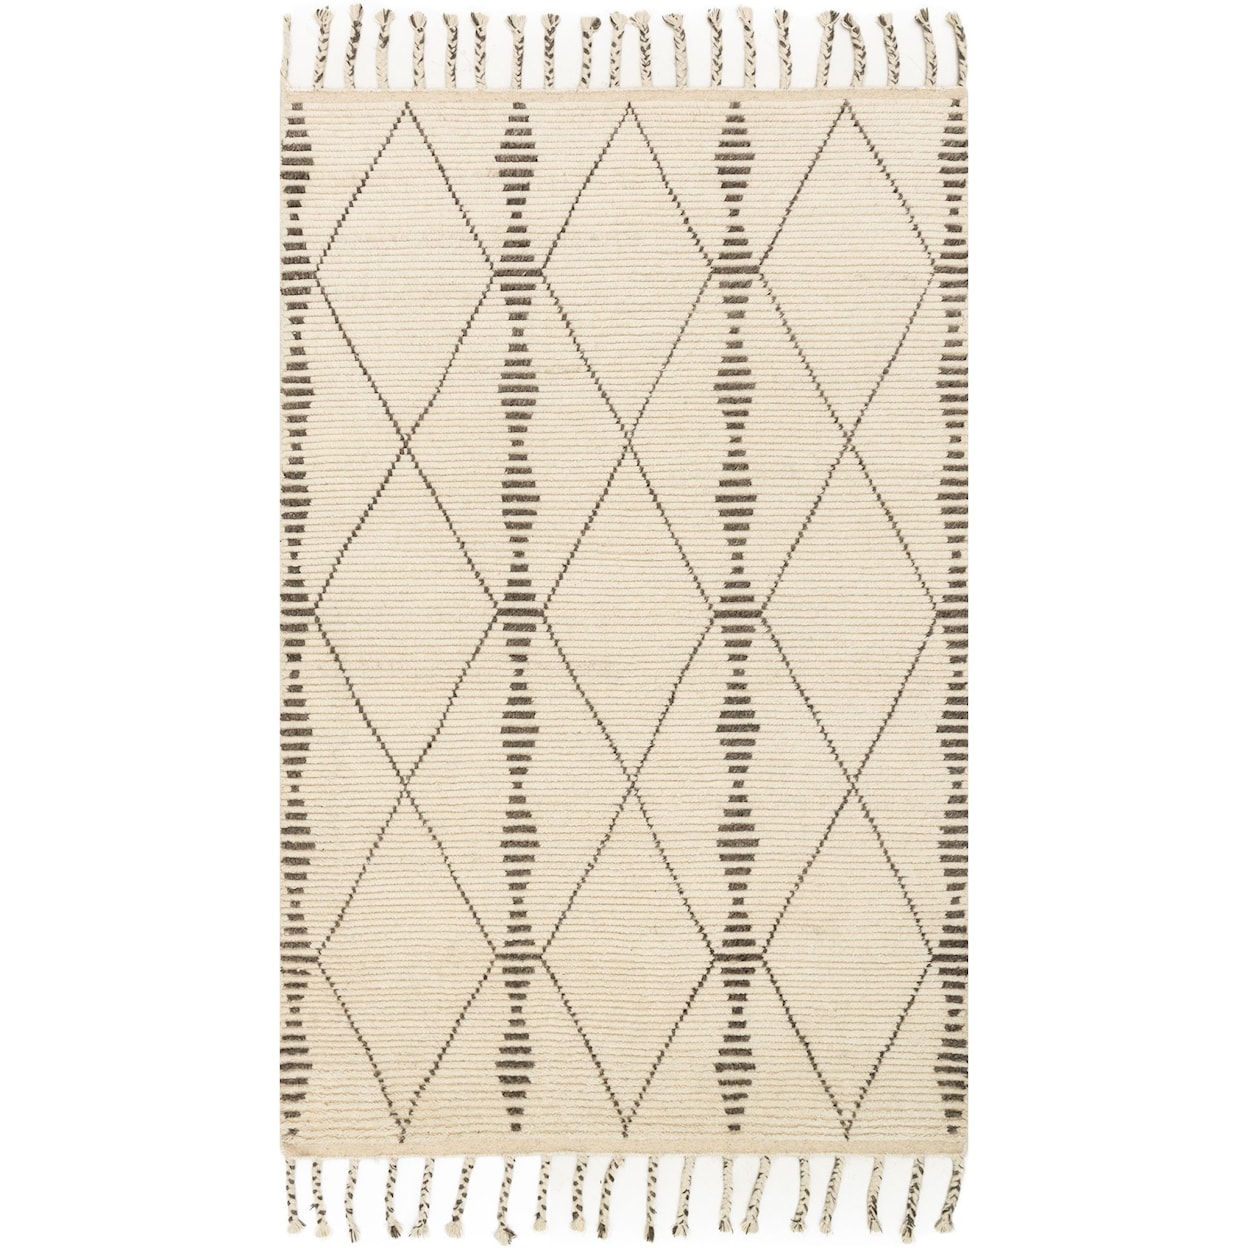 Magnolia Home by Joanna Gaines for Loloi Tulum 2' 0" x 3' 0" Rectangle Rug